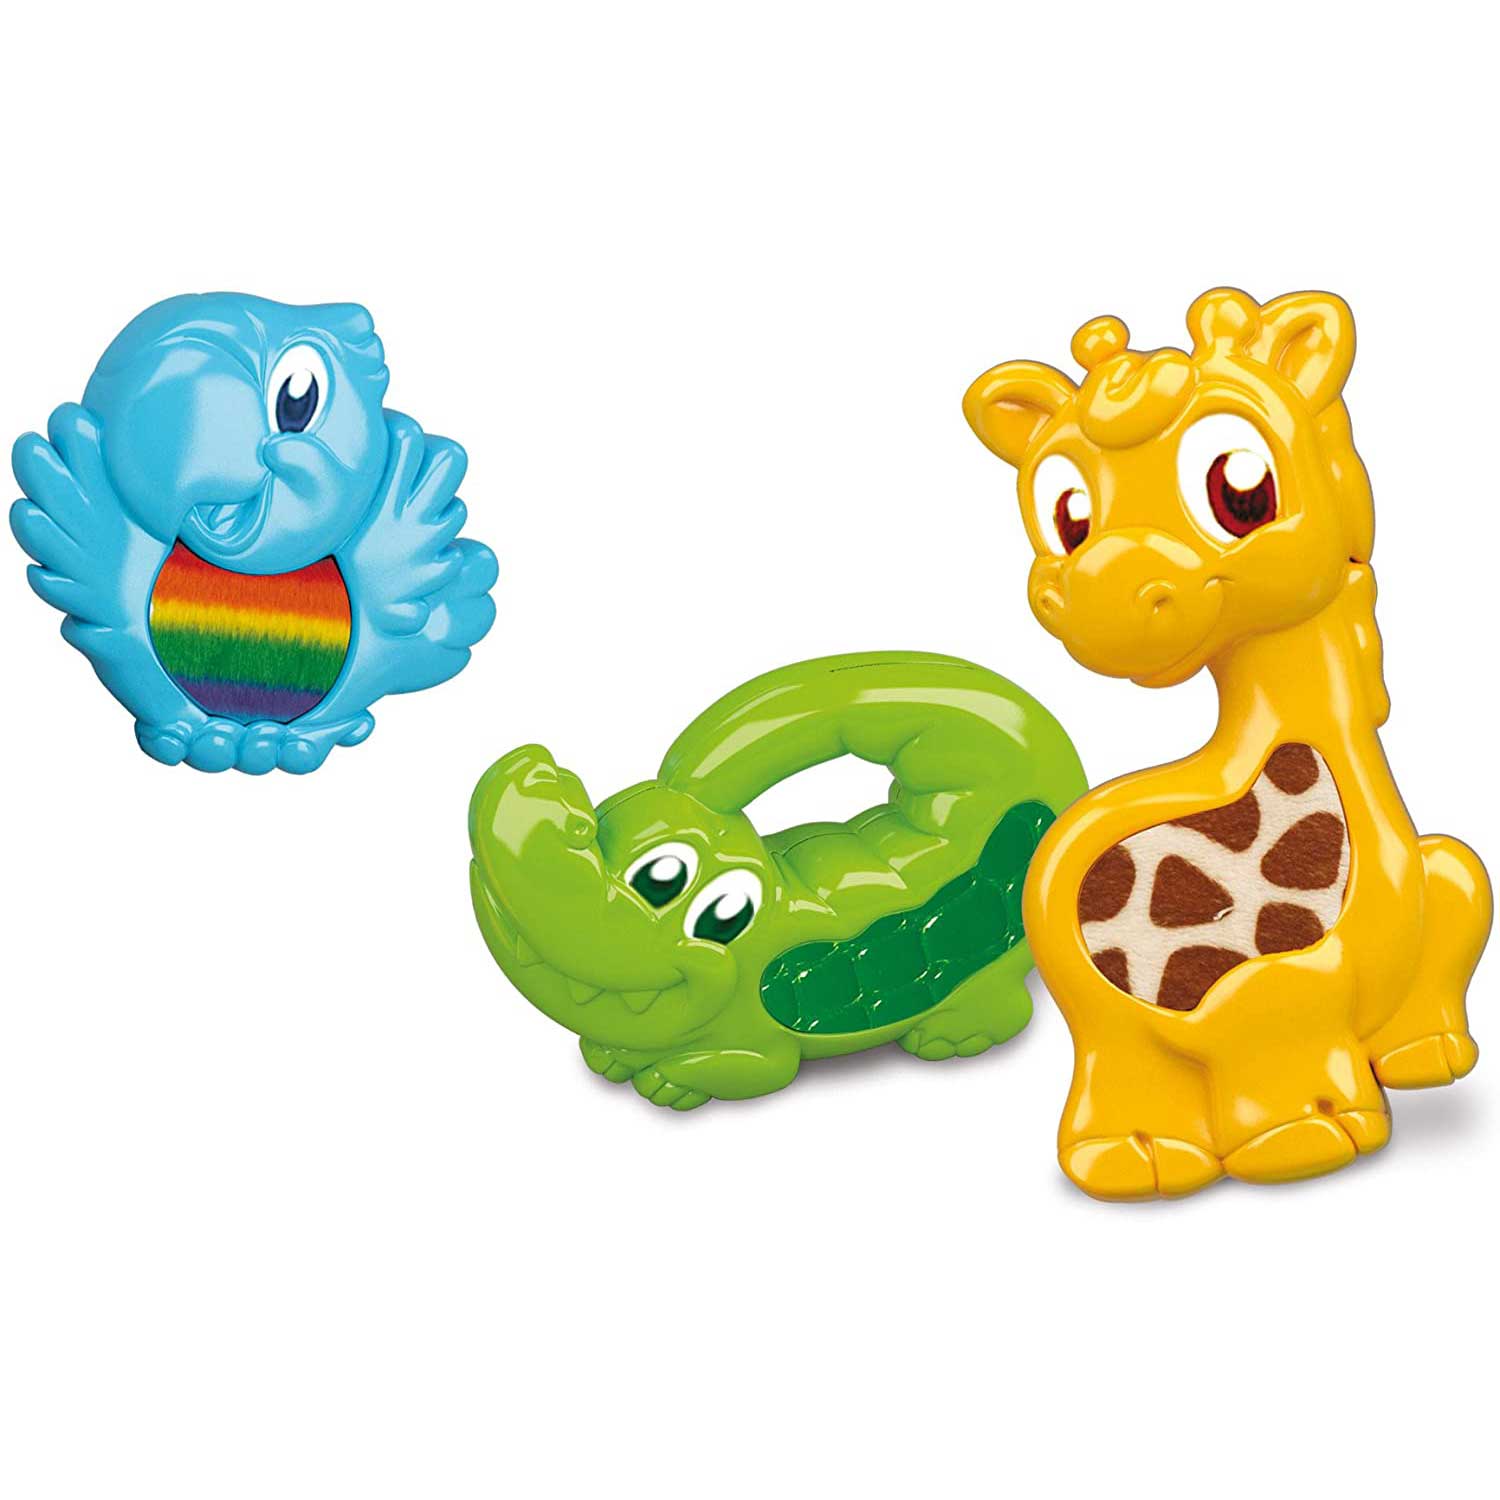 CLEMENTONI - Baby Animal Touch - Mod: CLM14975